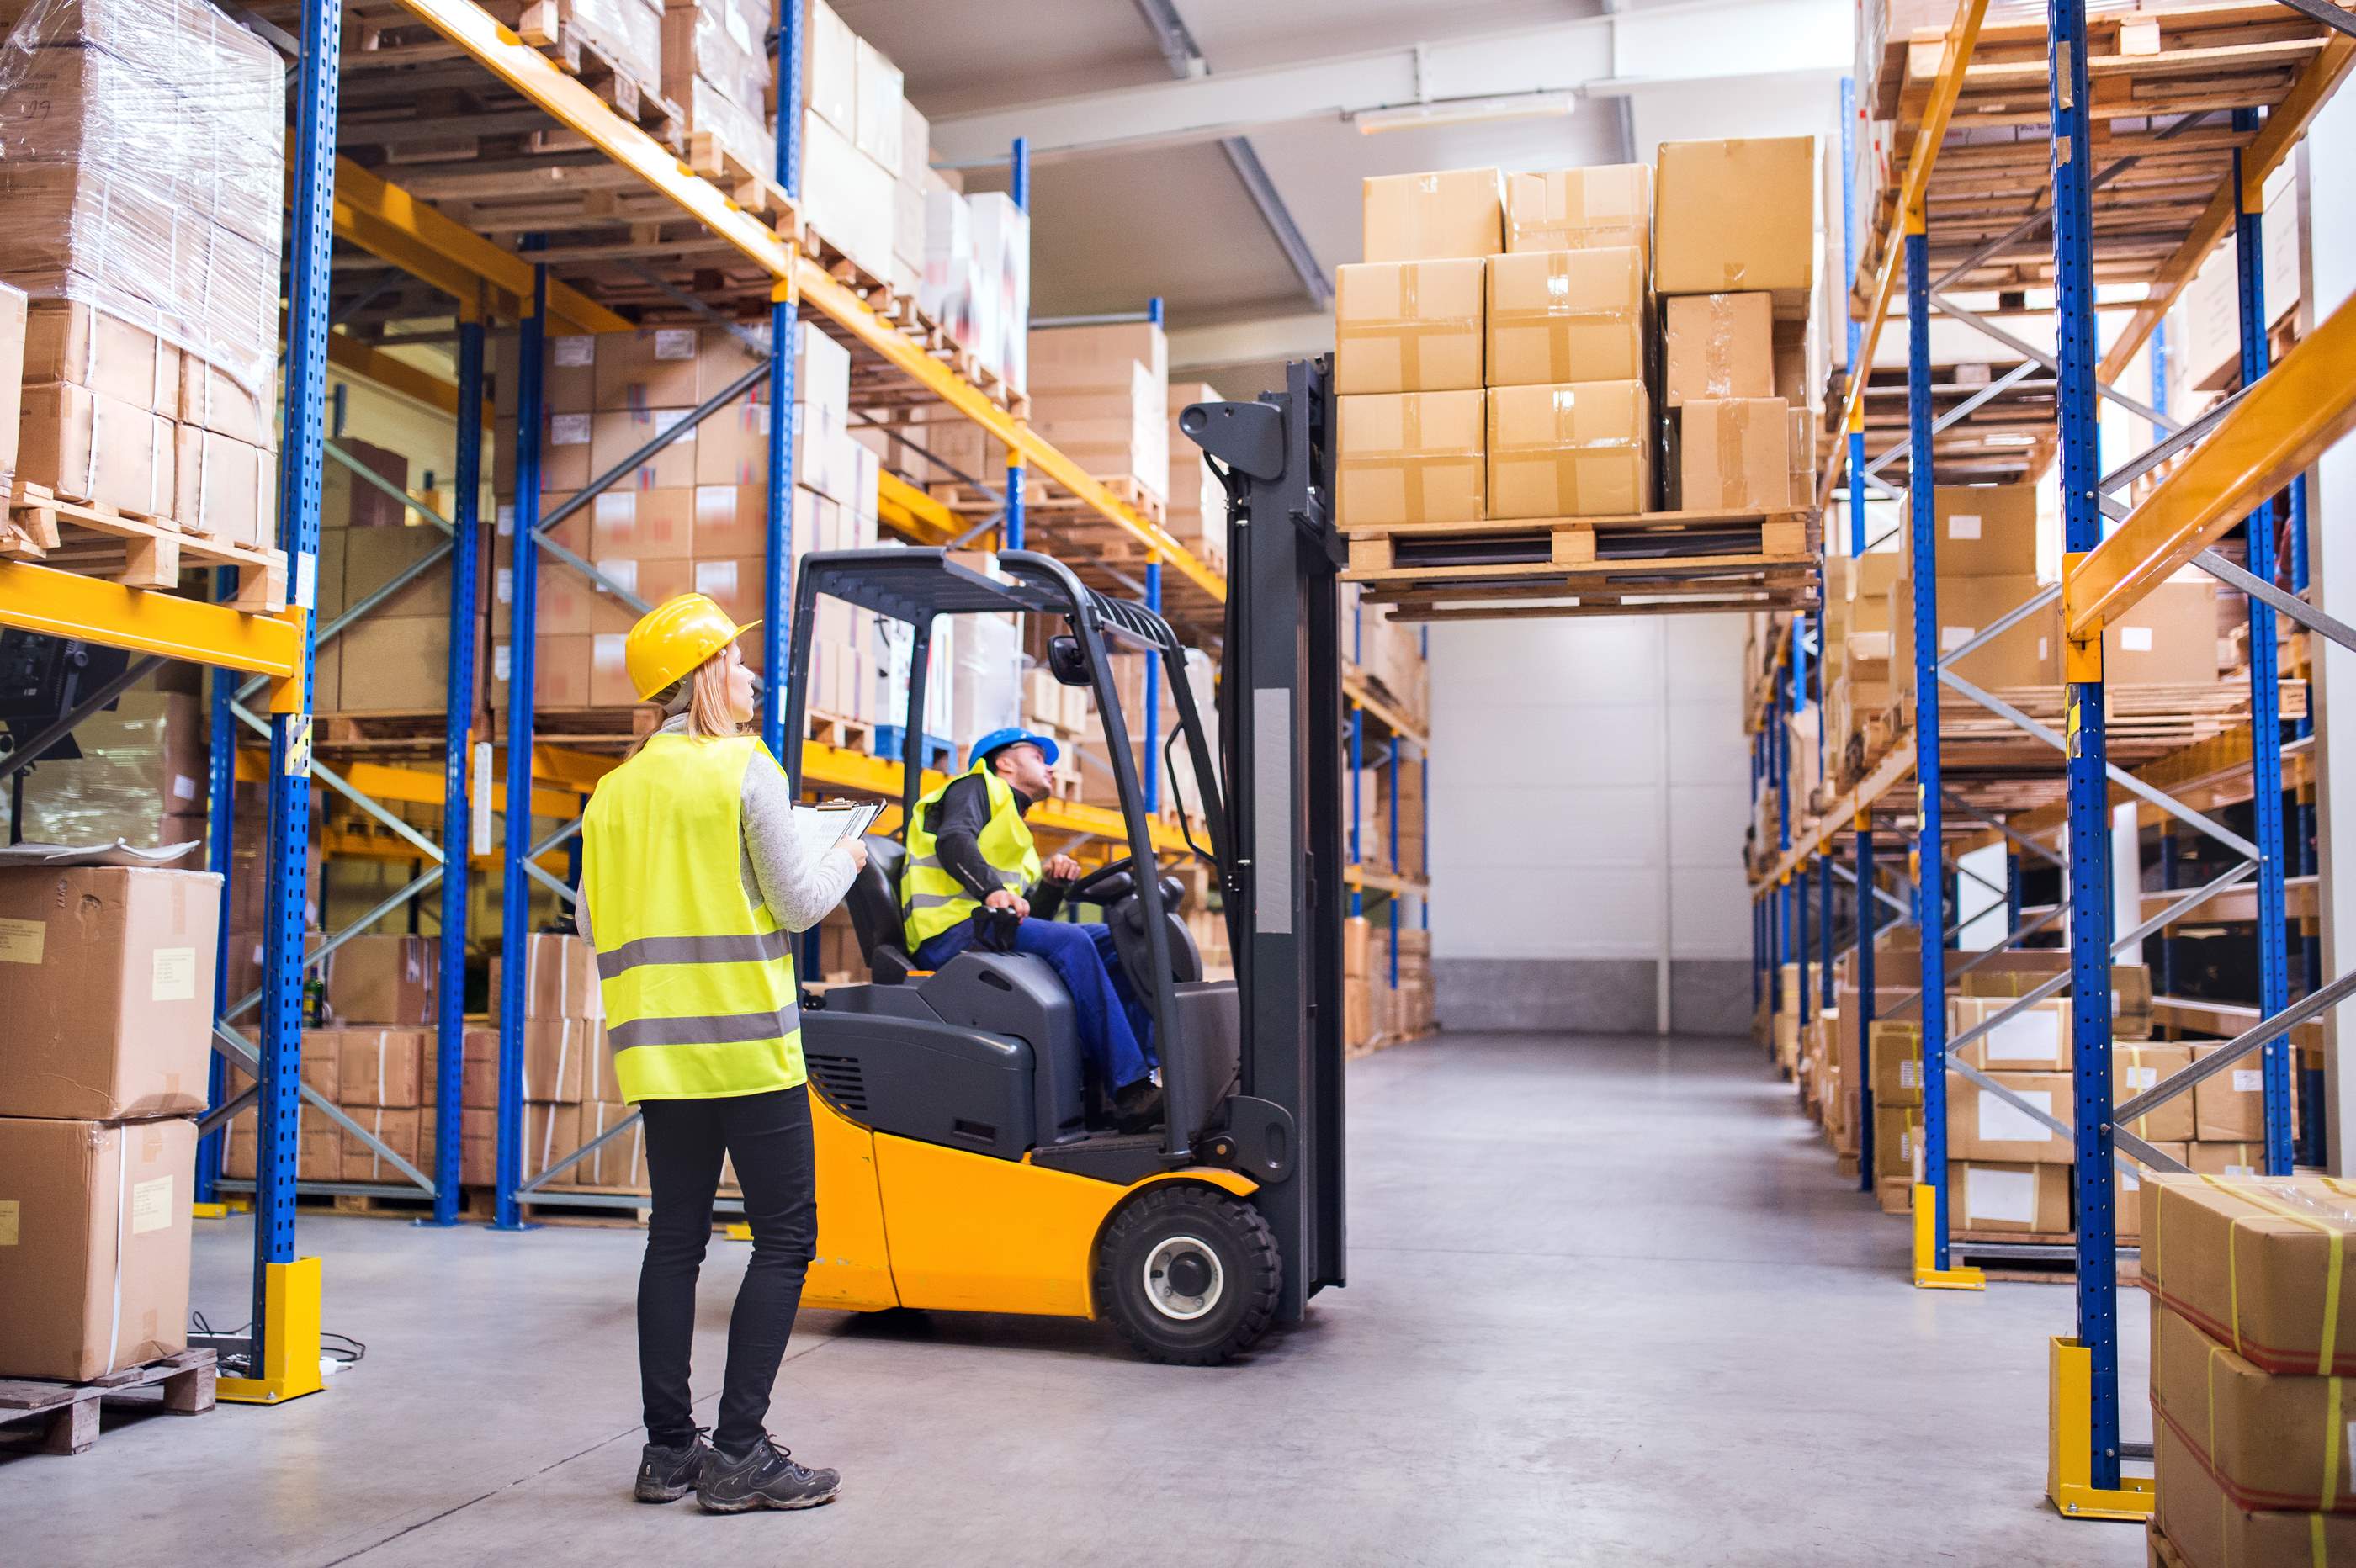 florida forklift accident injury lawsuit attorney